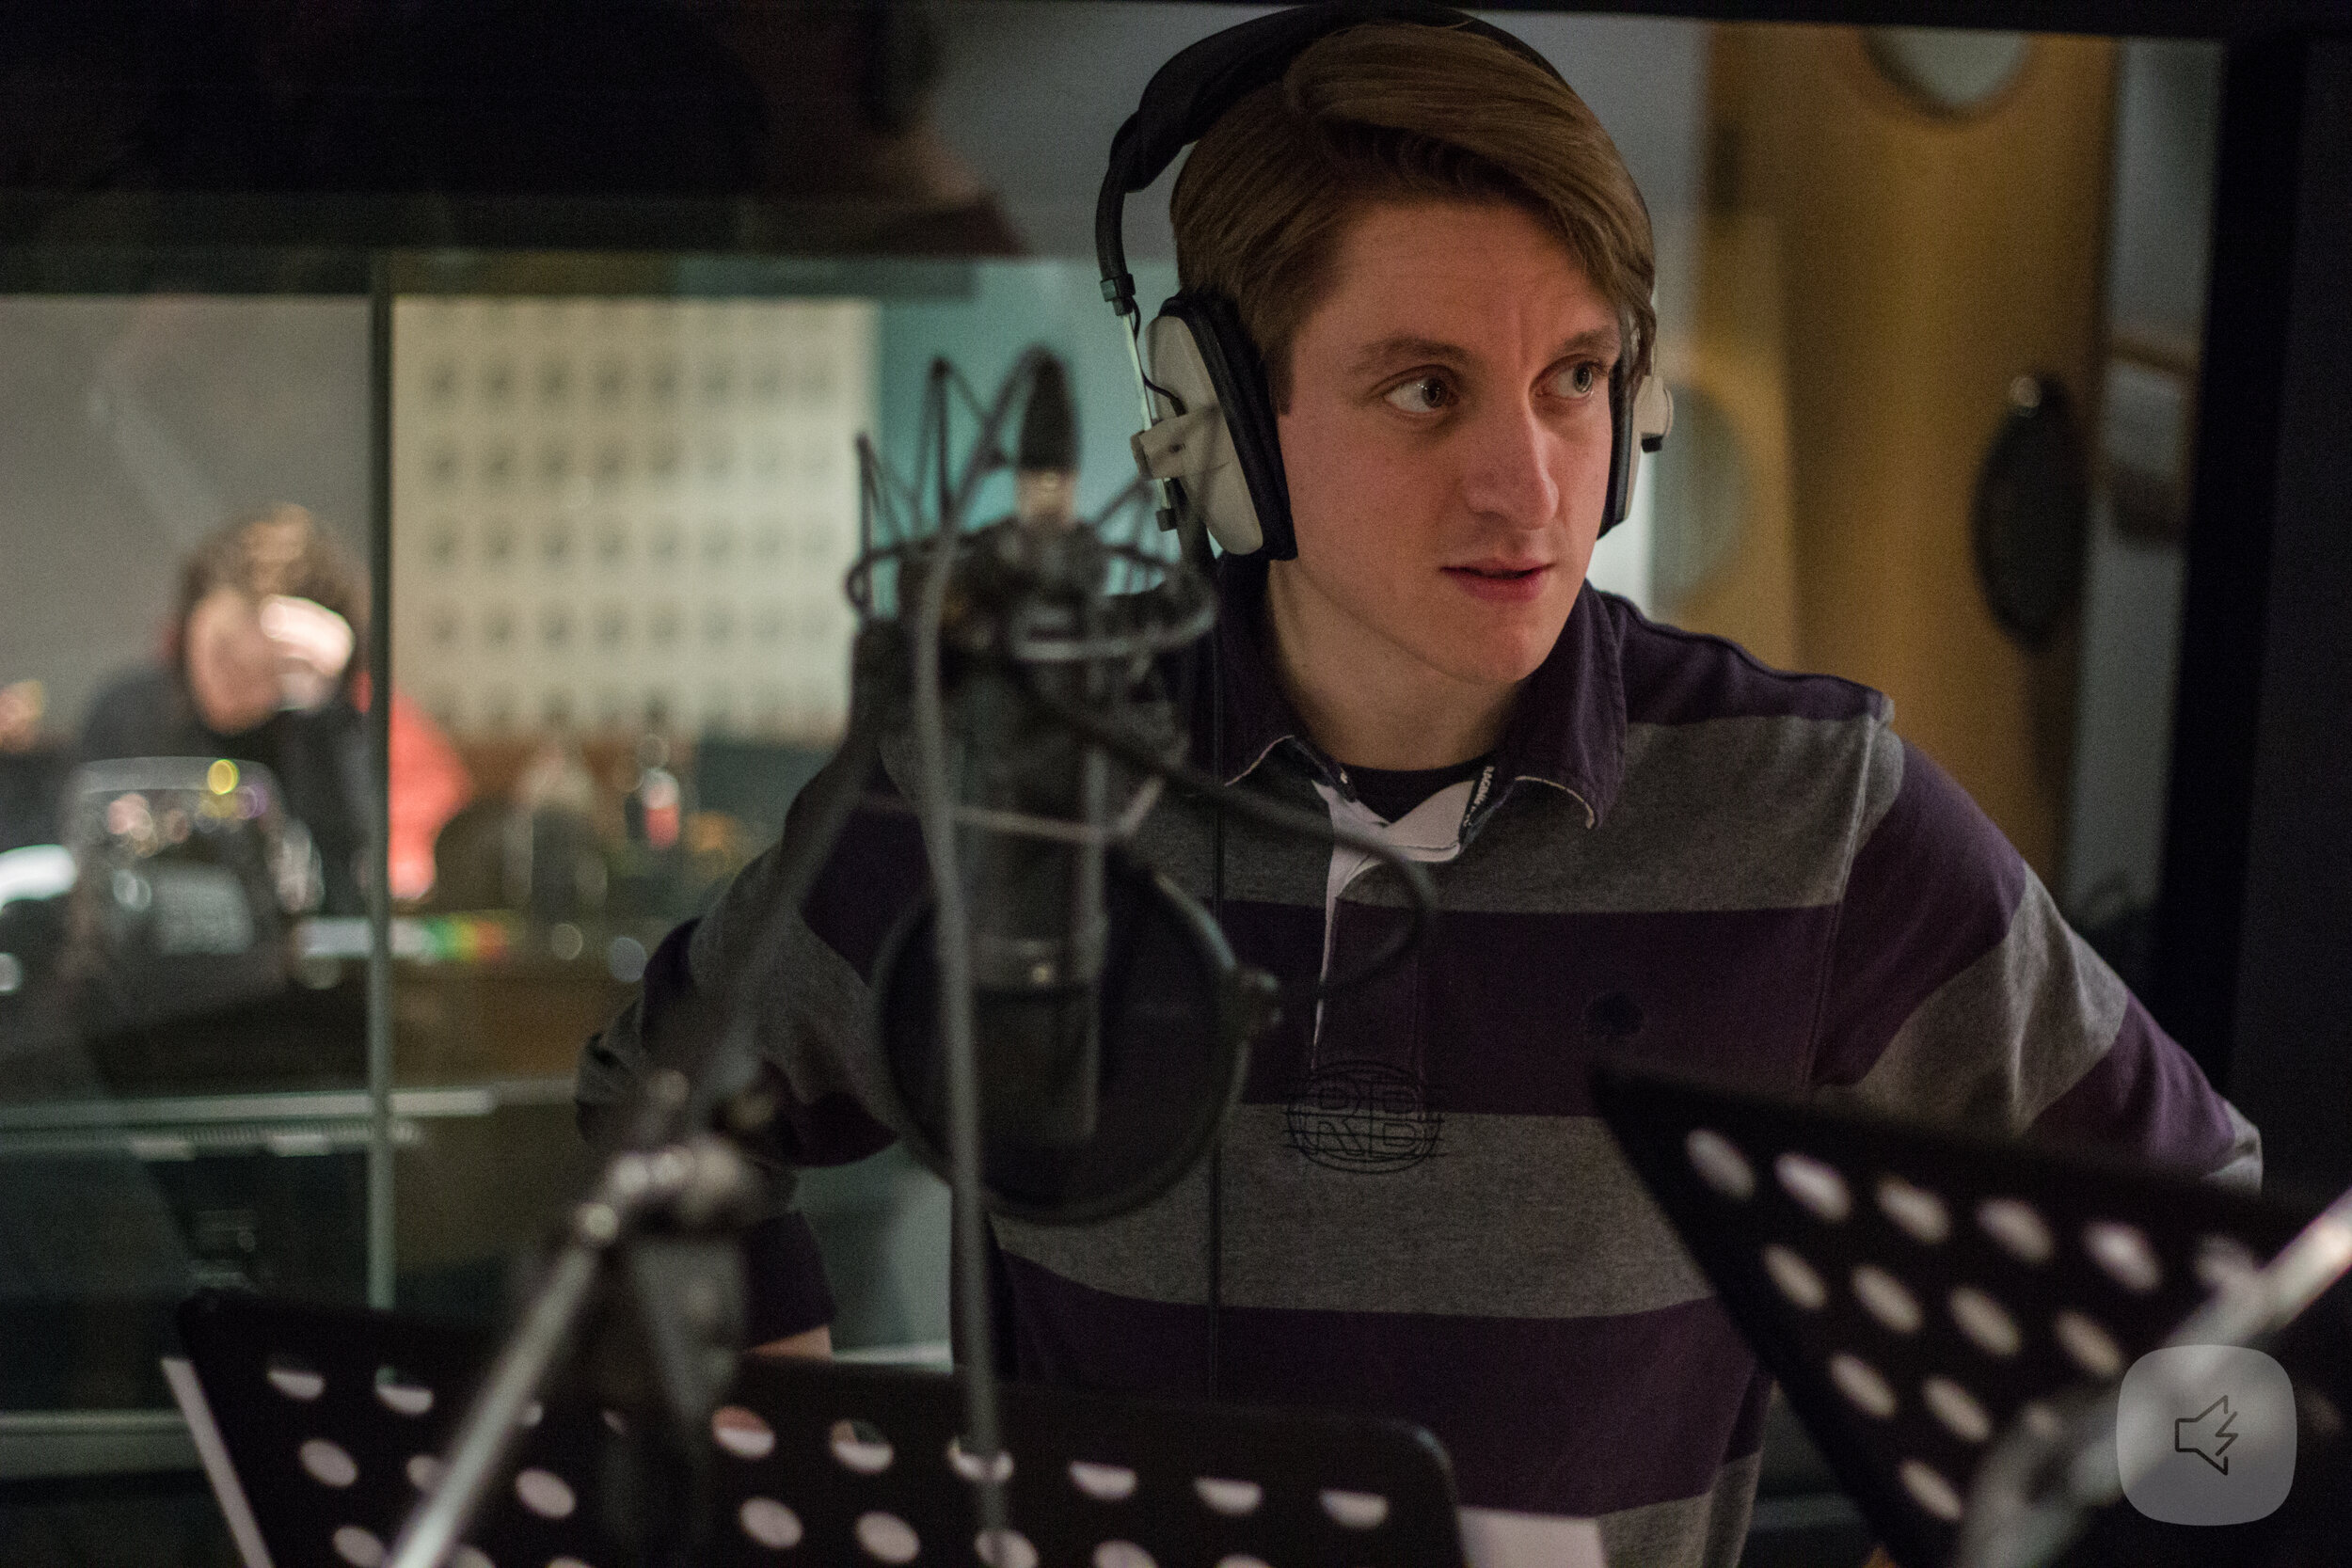 colour photo. taken inside a sound recording room. matthew is in front of a microphone and is wearing headphones. he is wearing a shirt that is striped horizontally with grey and dark purple.